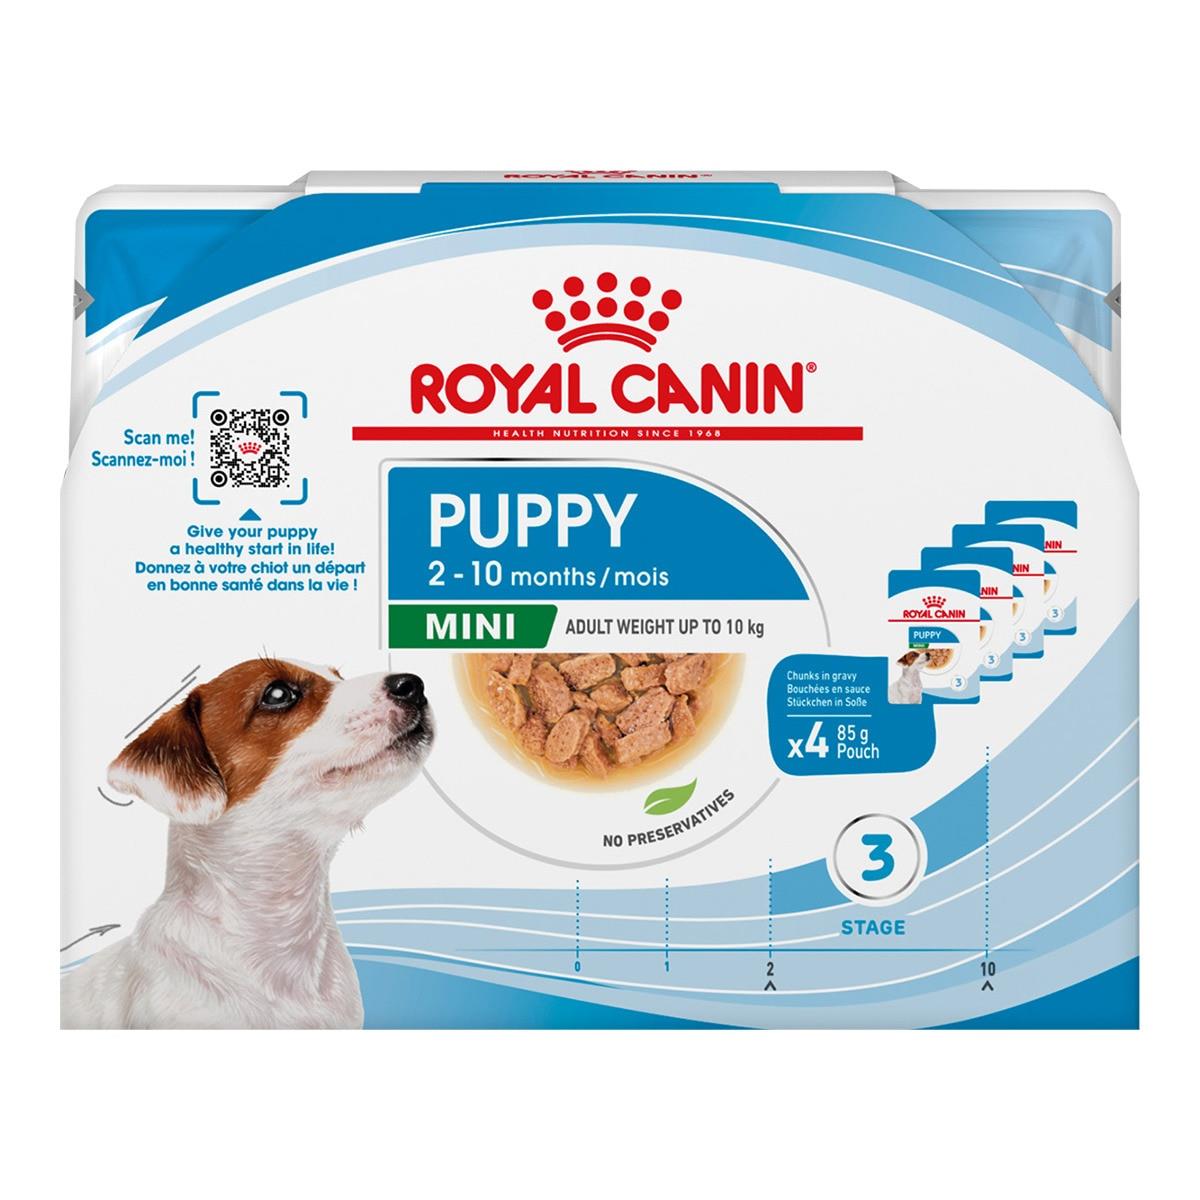 ROYAL CANIN MINI PUPPY 85GR PACK-4 HUMEDO